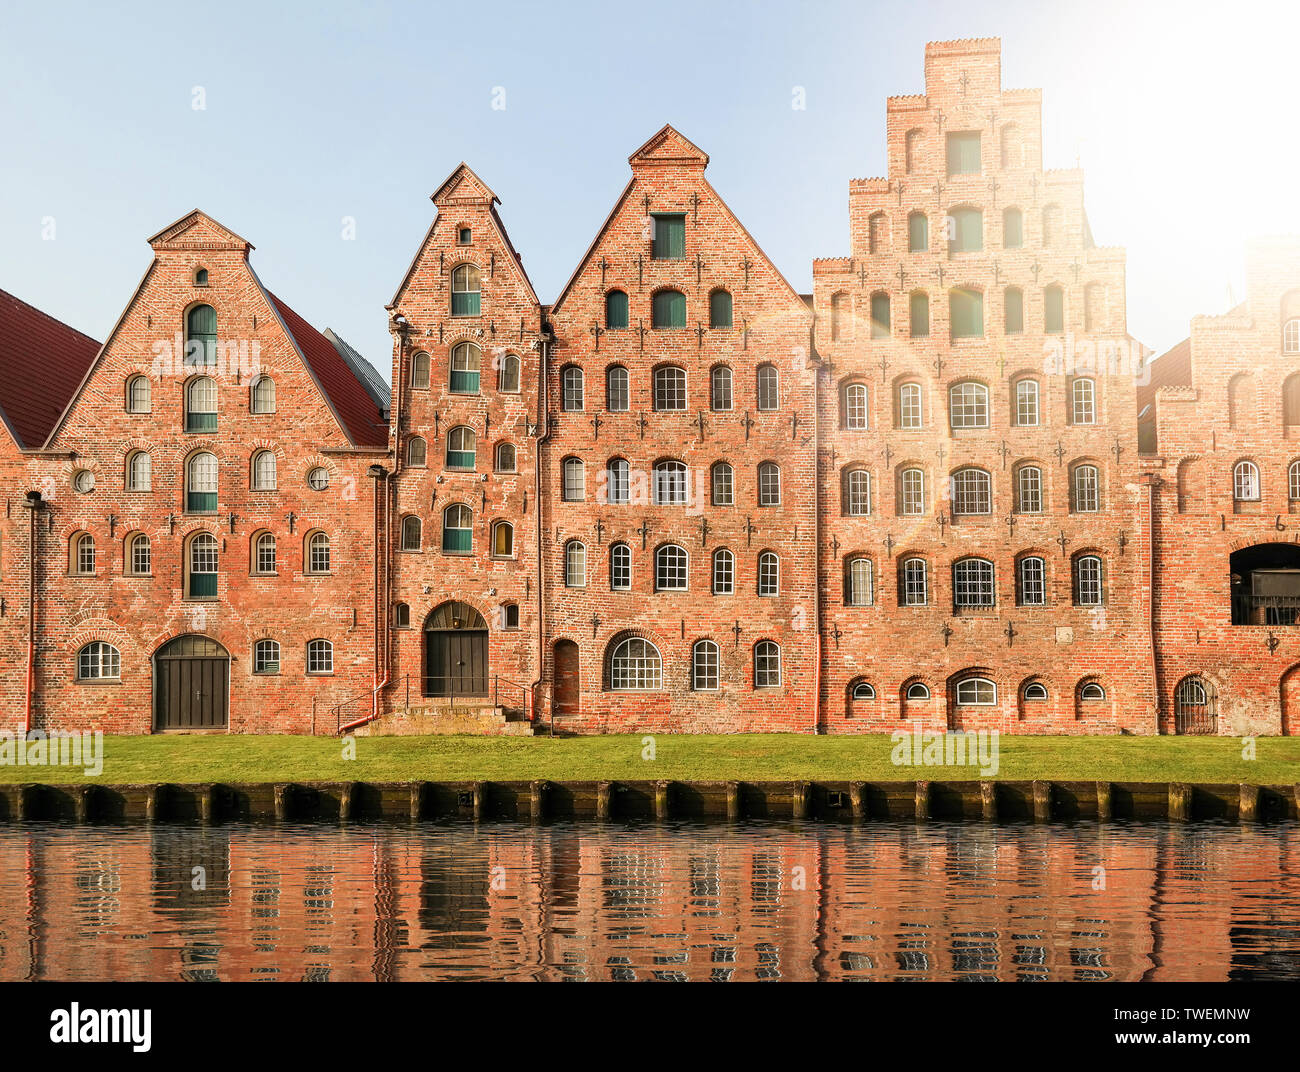 historic Salzspeicher warehouses in Lubeck, Germany against clear blue sky Stock Photo